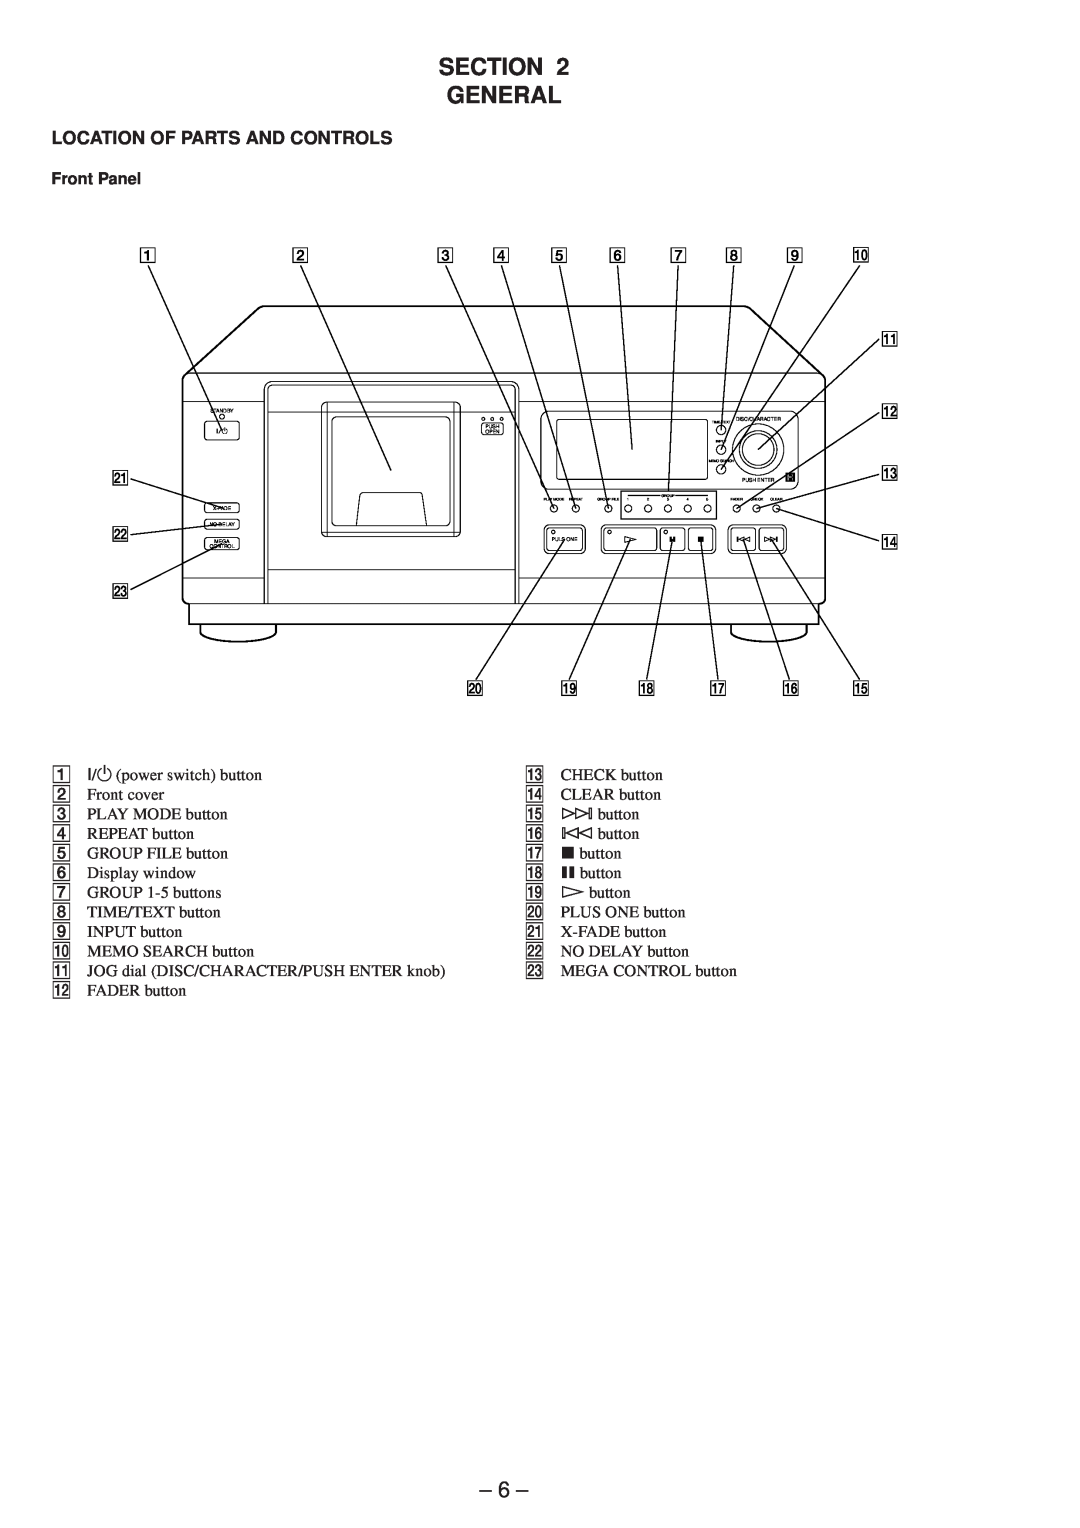 Technicolor - Thomson CDP-CX57 service manual Section General, Front Panel 